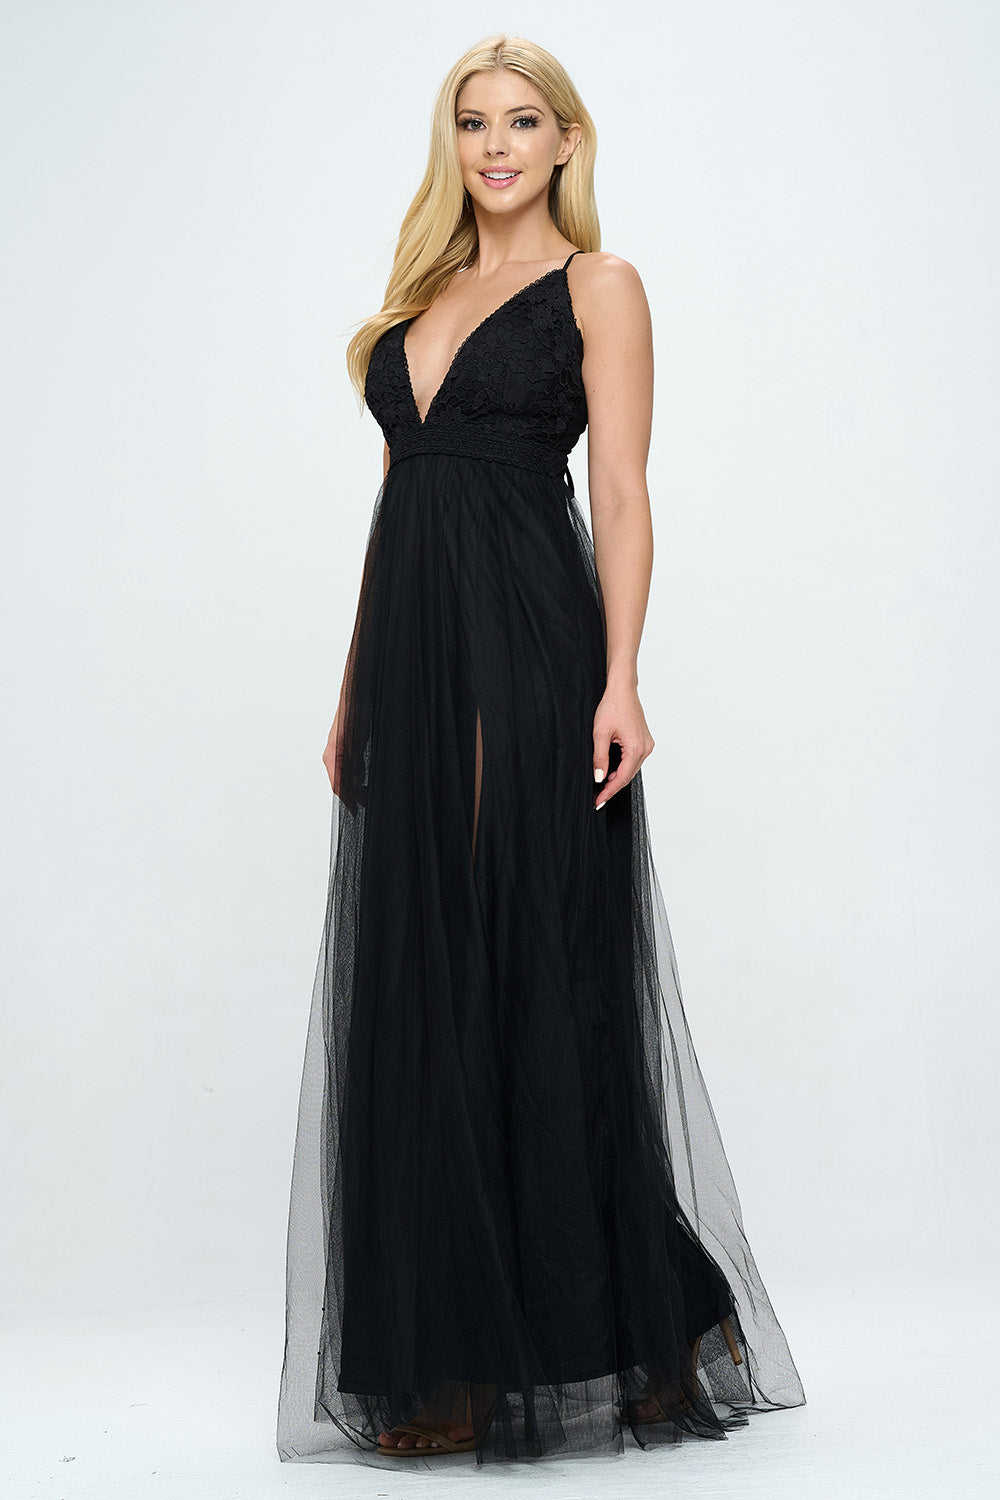 EMBROIDERED FLOWER LACE LAYERED TULLE MAXI DRESS